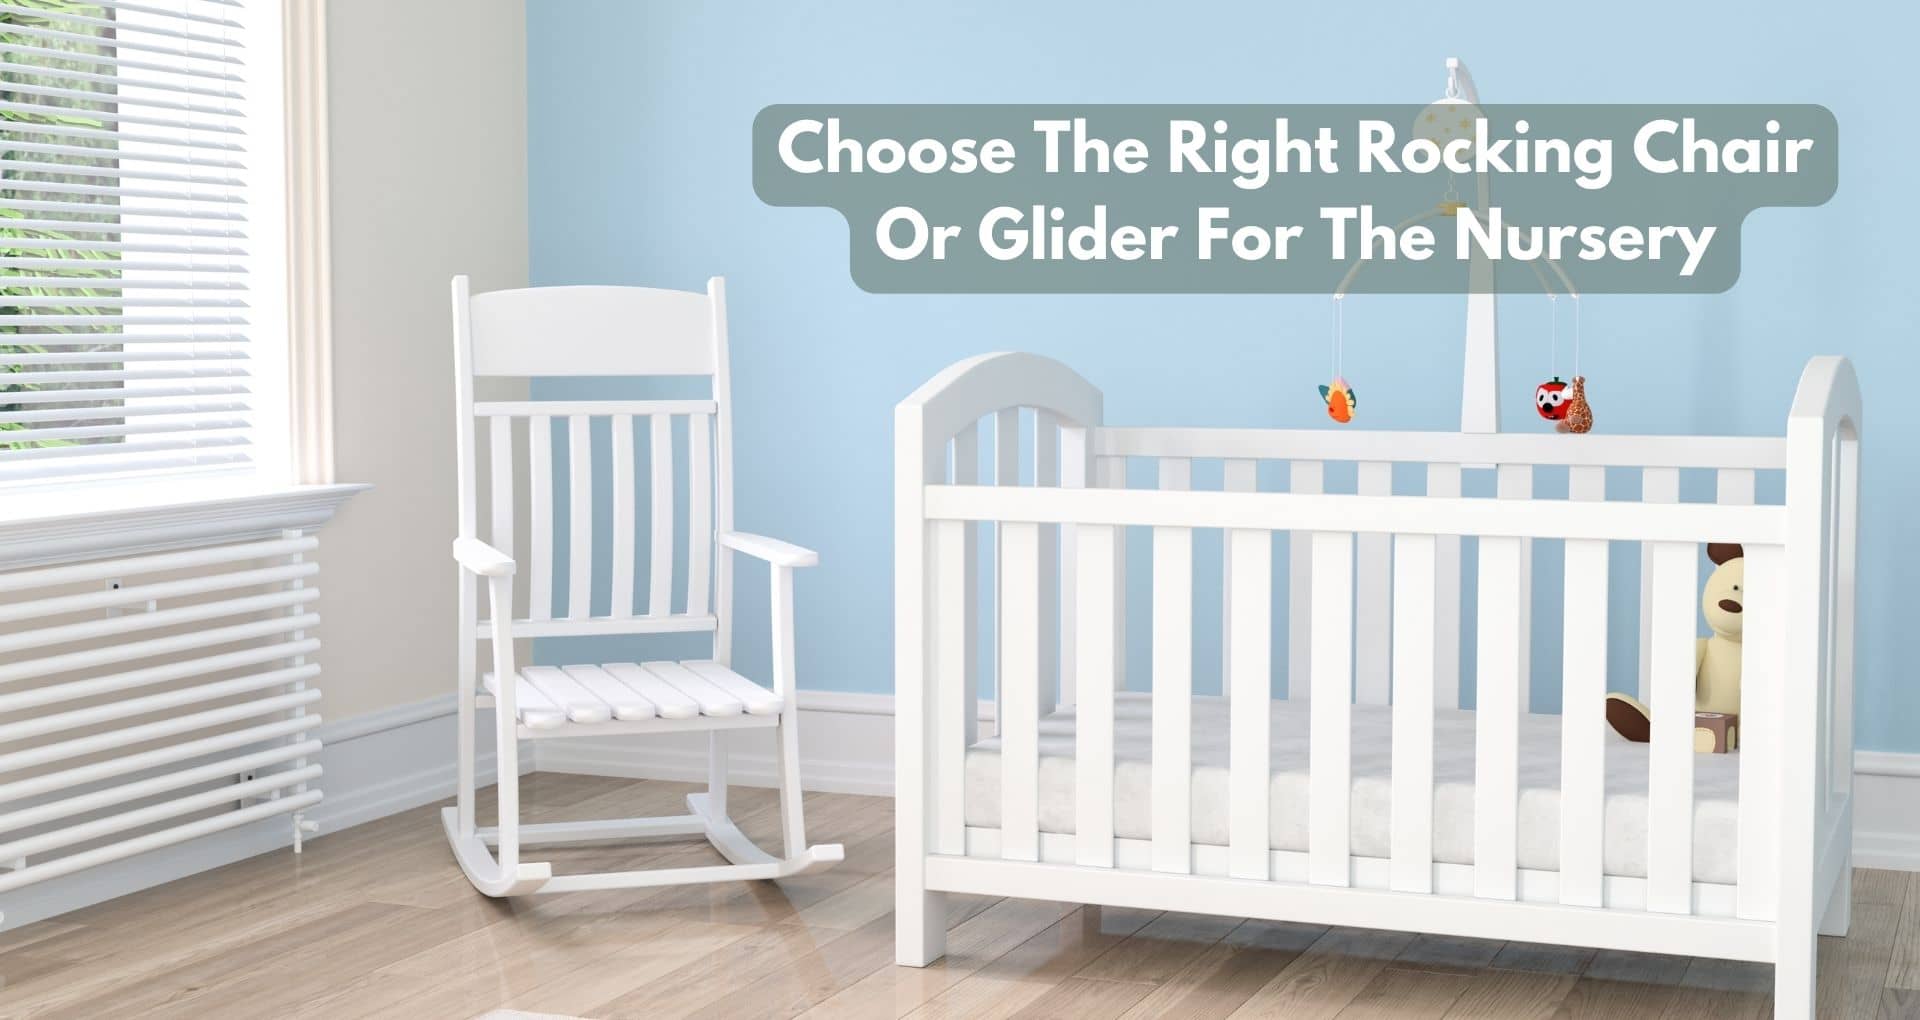 How To Choose Right Rocking Chair Or Glider For Nursery?